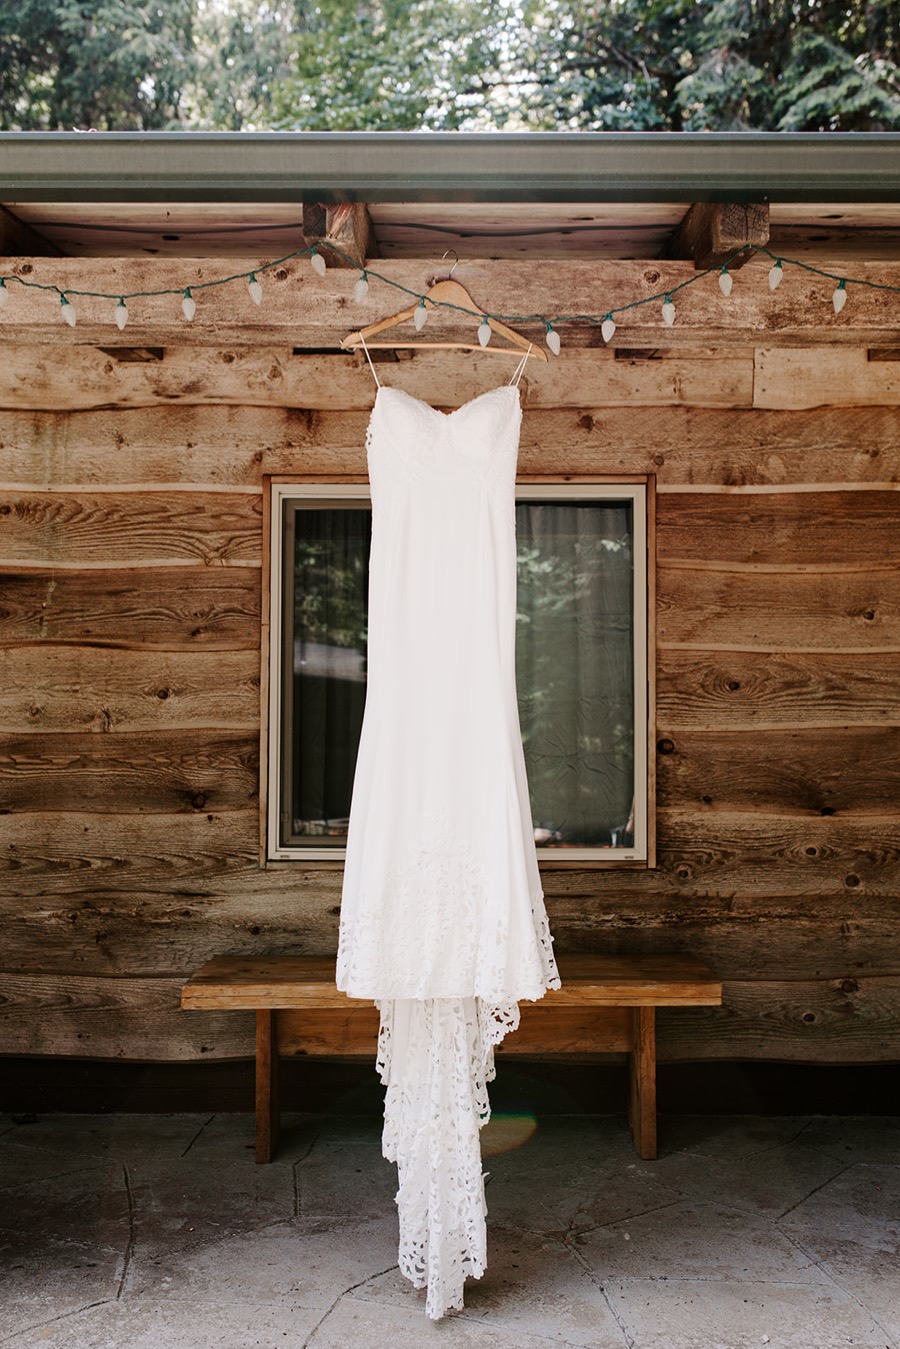 wedding dress hanging from wood log cabin in woods